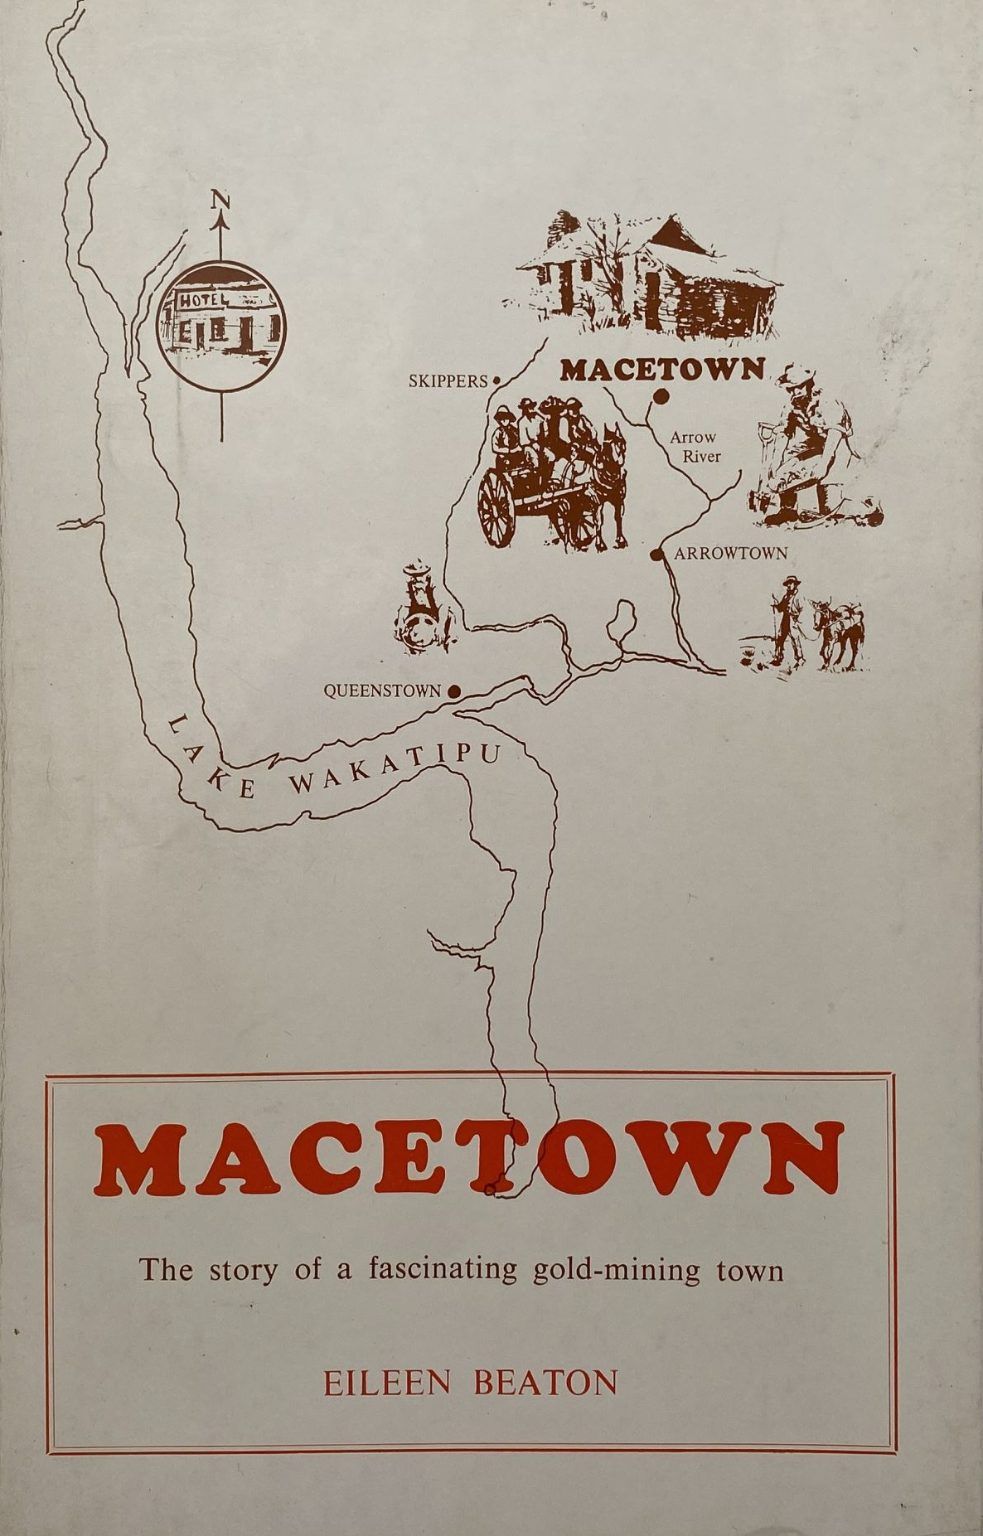 MACETOWN: The Story of a Fascinating Gold-Mining Town